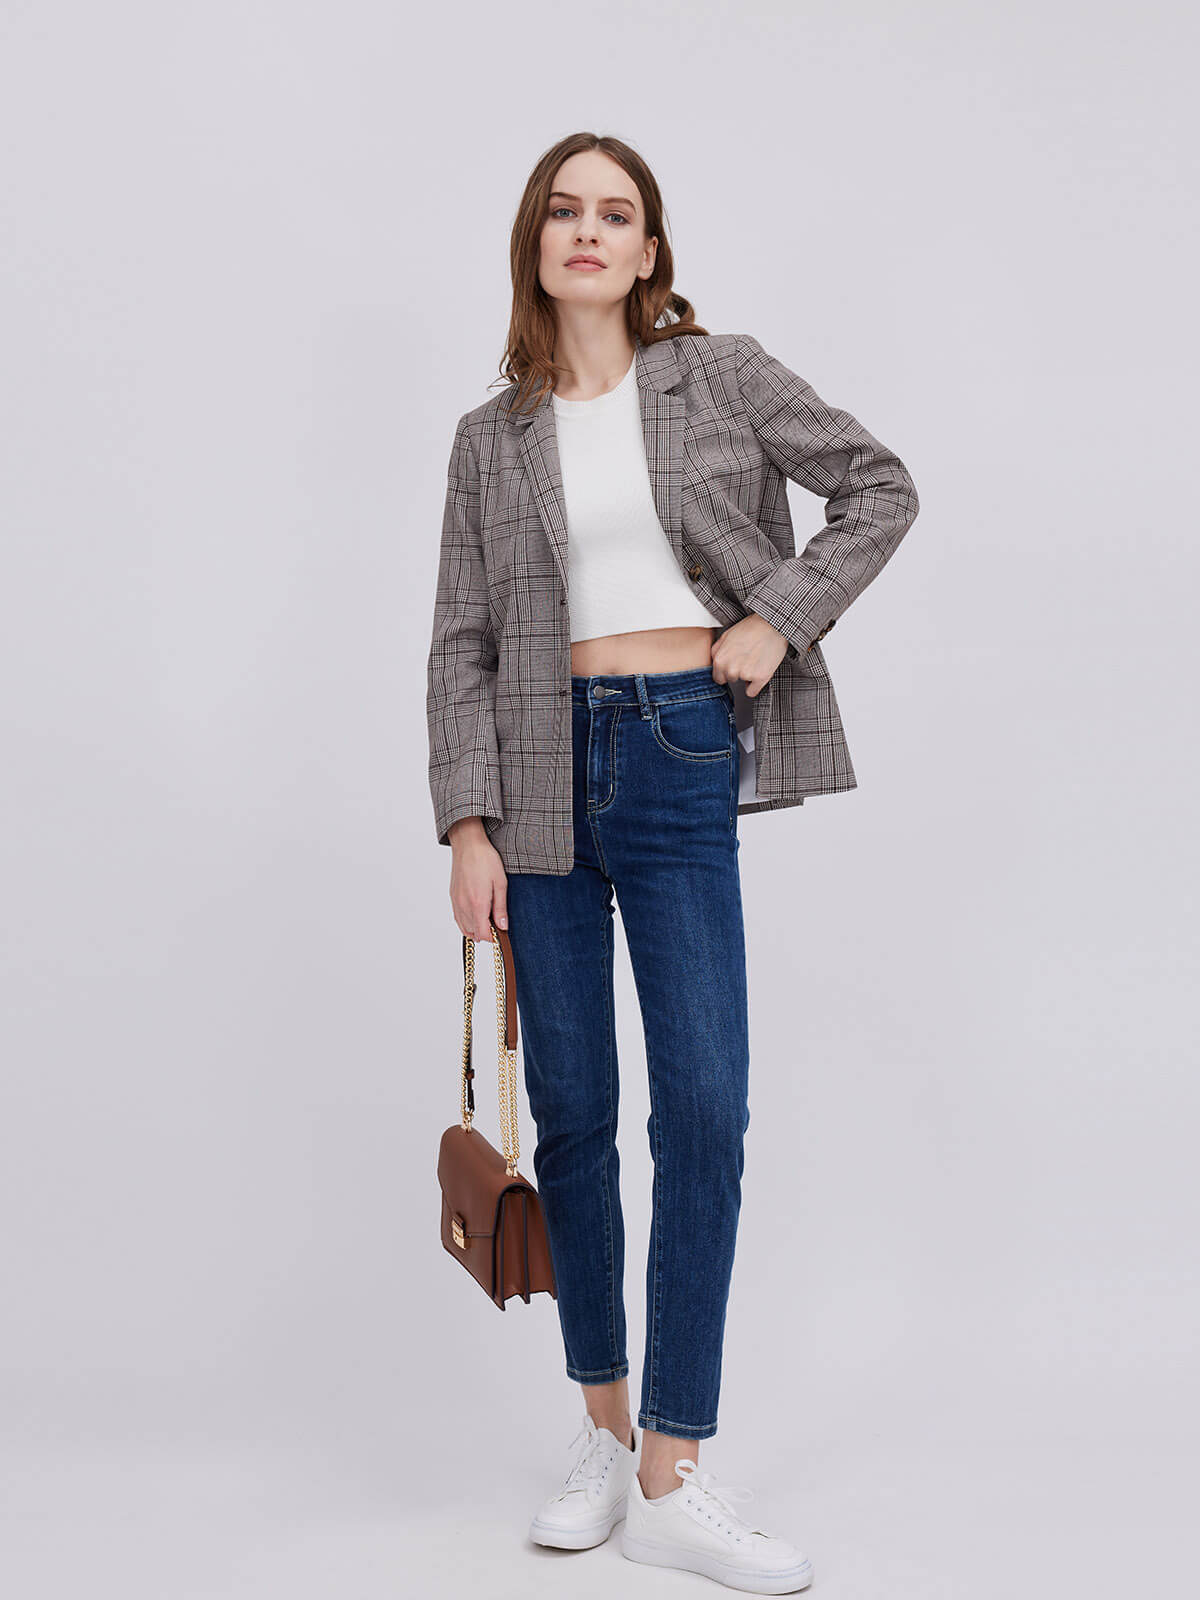 Relaxed Fit Lapel Collar Blazer for Women